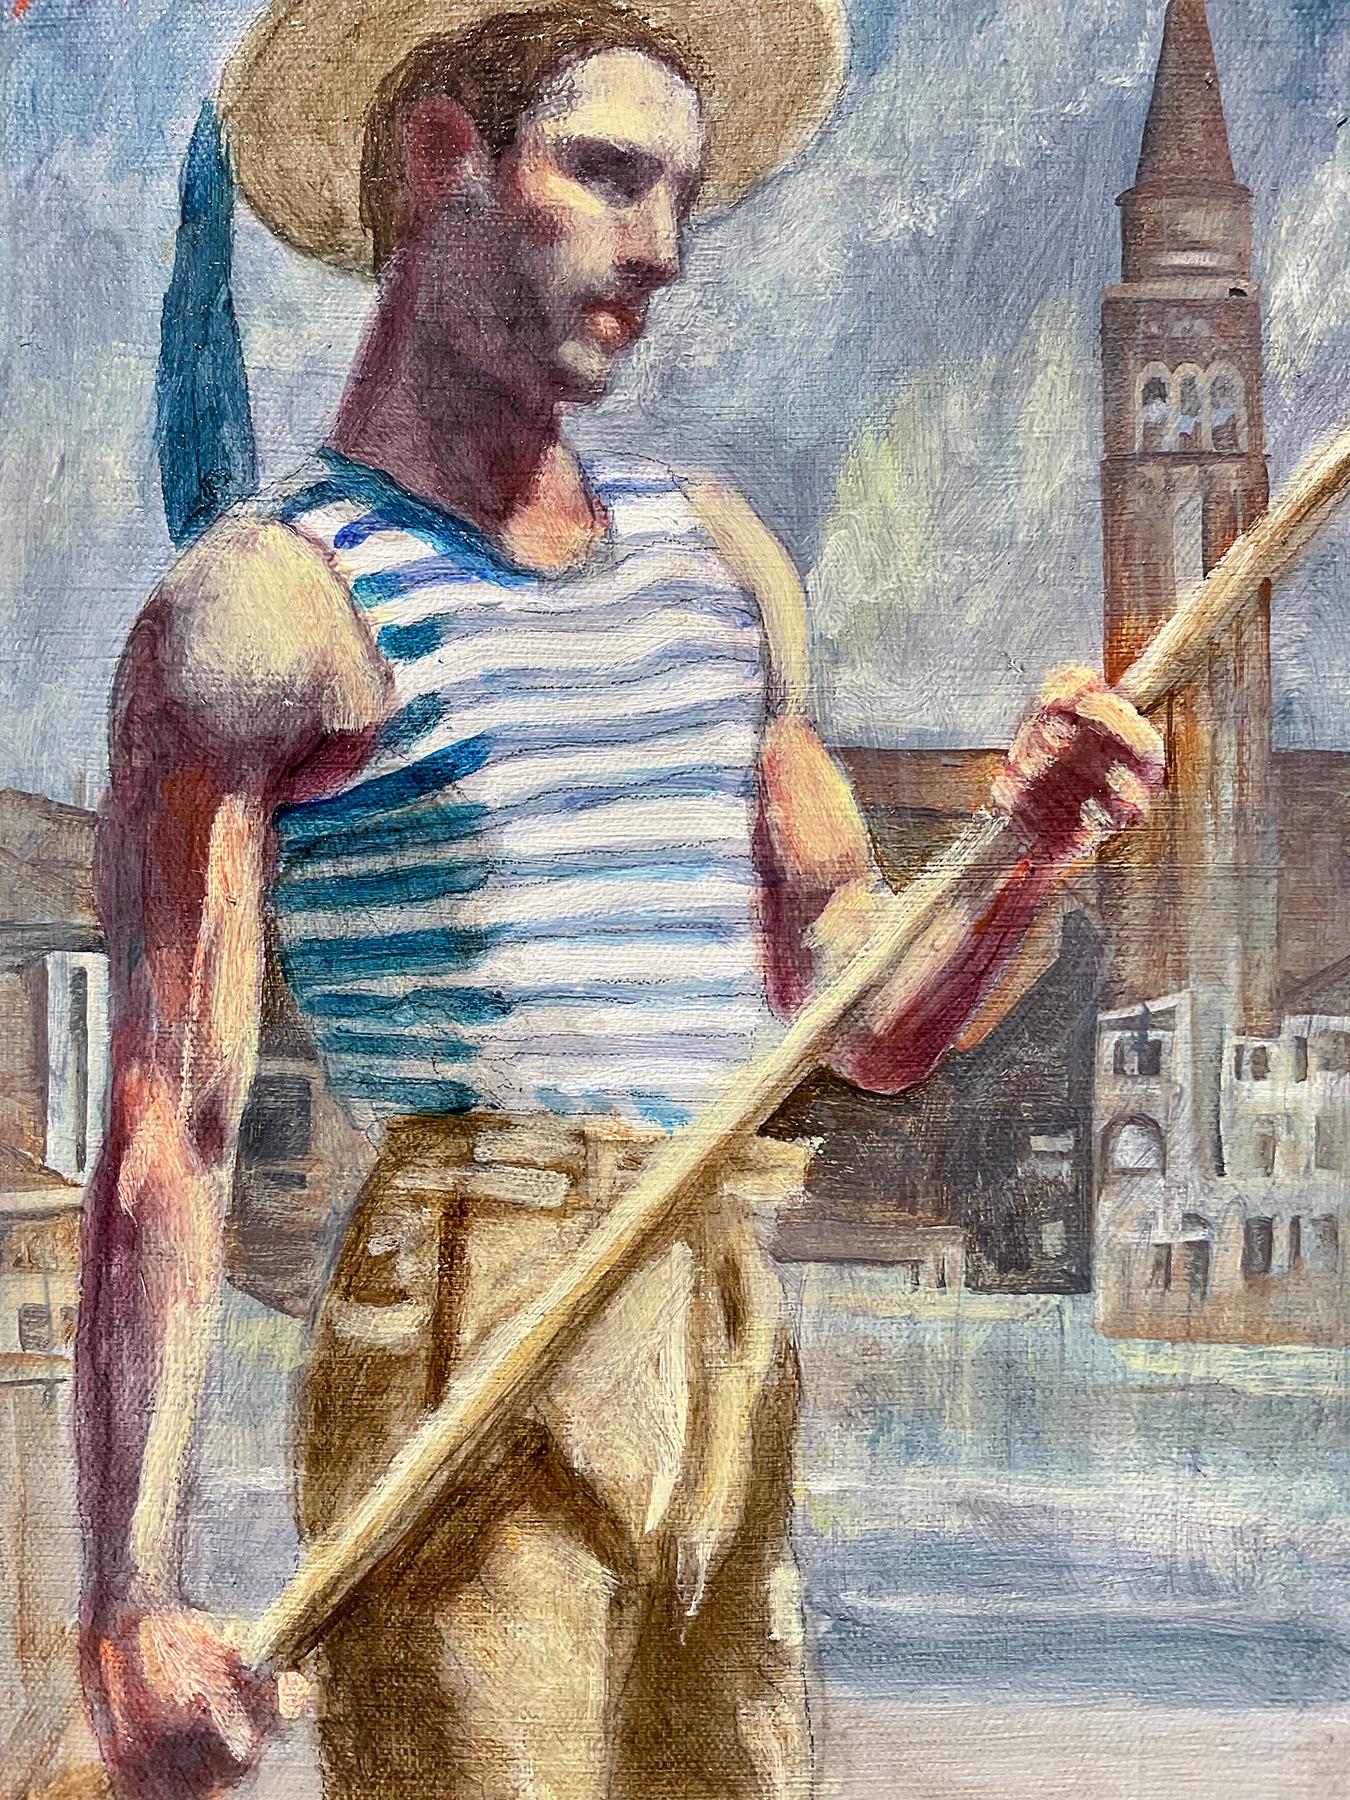 Gondolier (Figurative Painting of Man in Venice by Mark Beard, Bruce Sargeant) For Sale 2